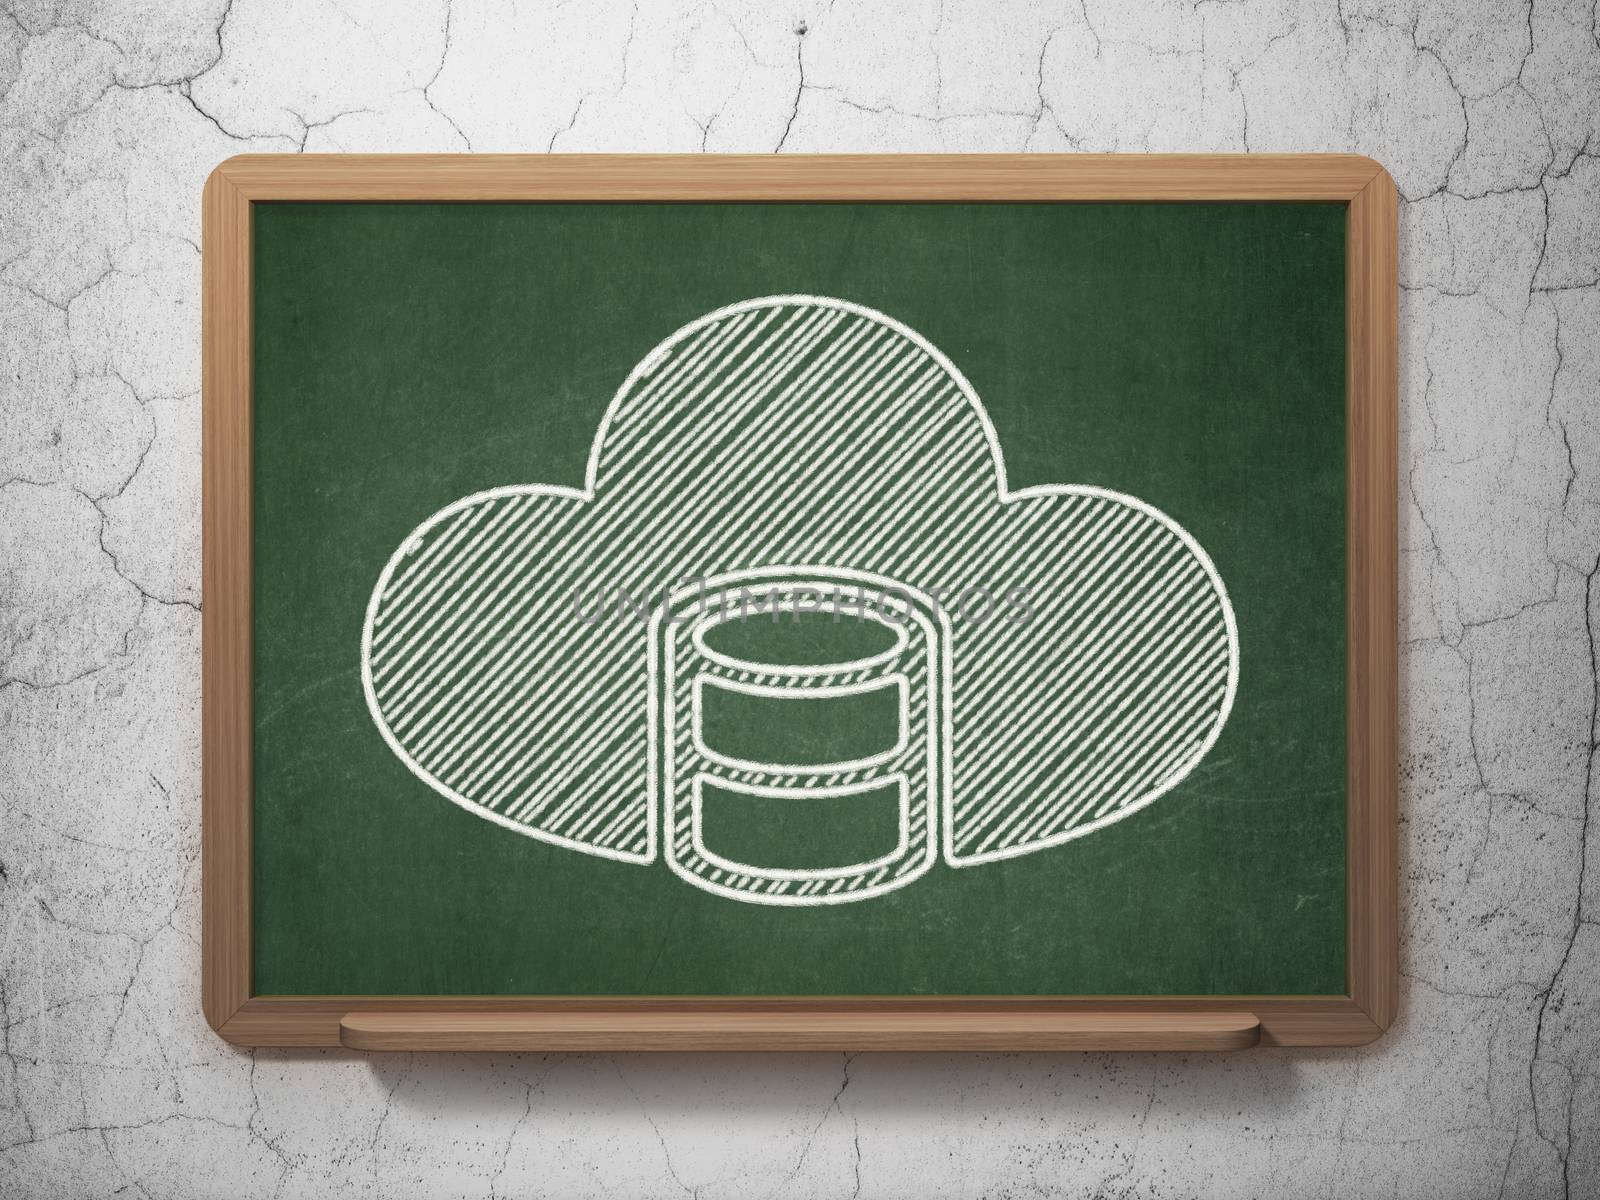 Database concept: Database With Cloud icon on Green chalkboard on grunge wall background